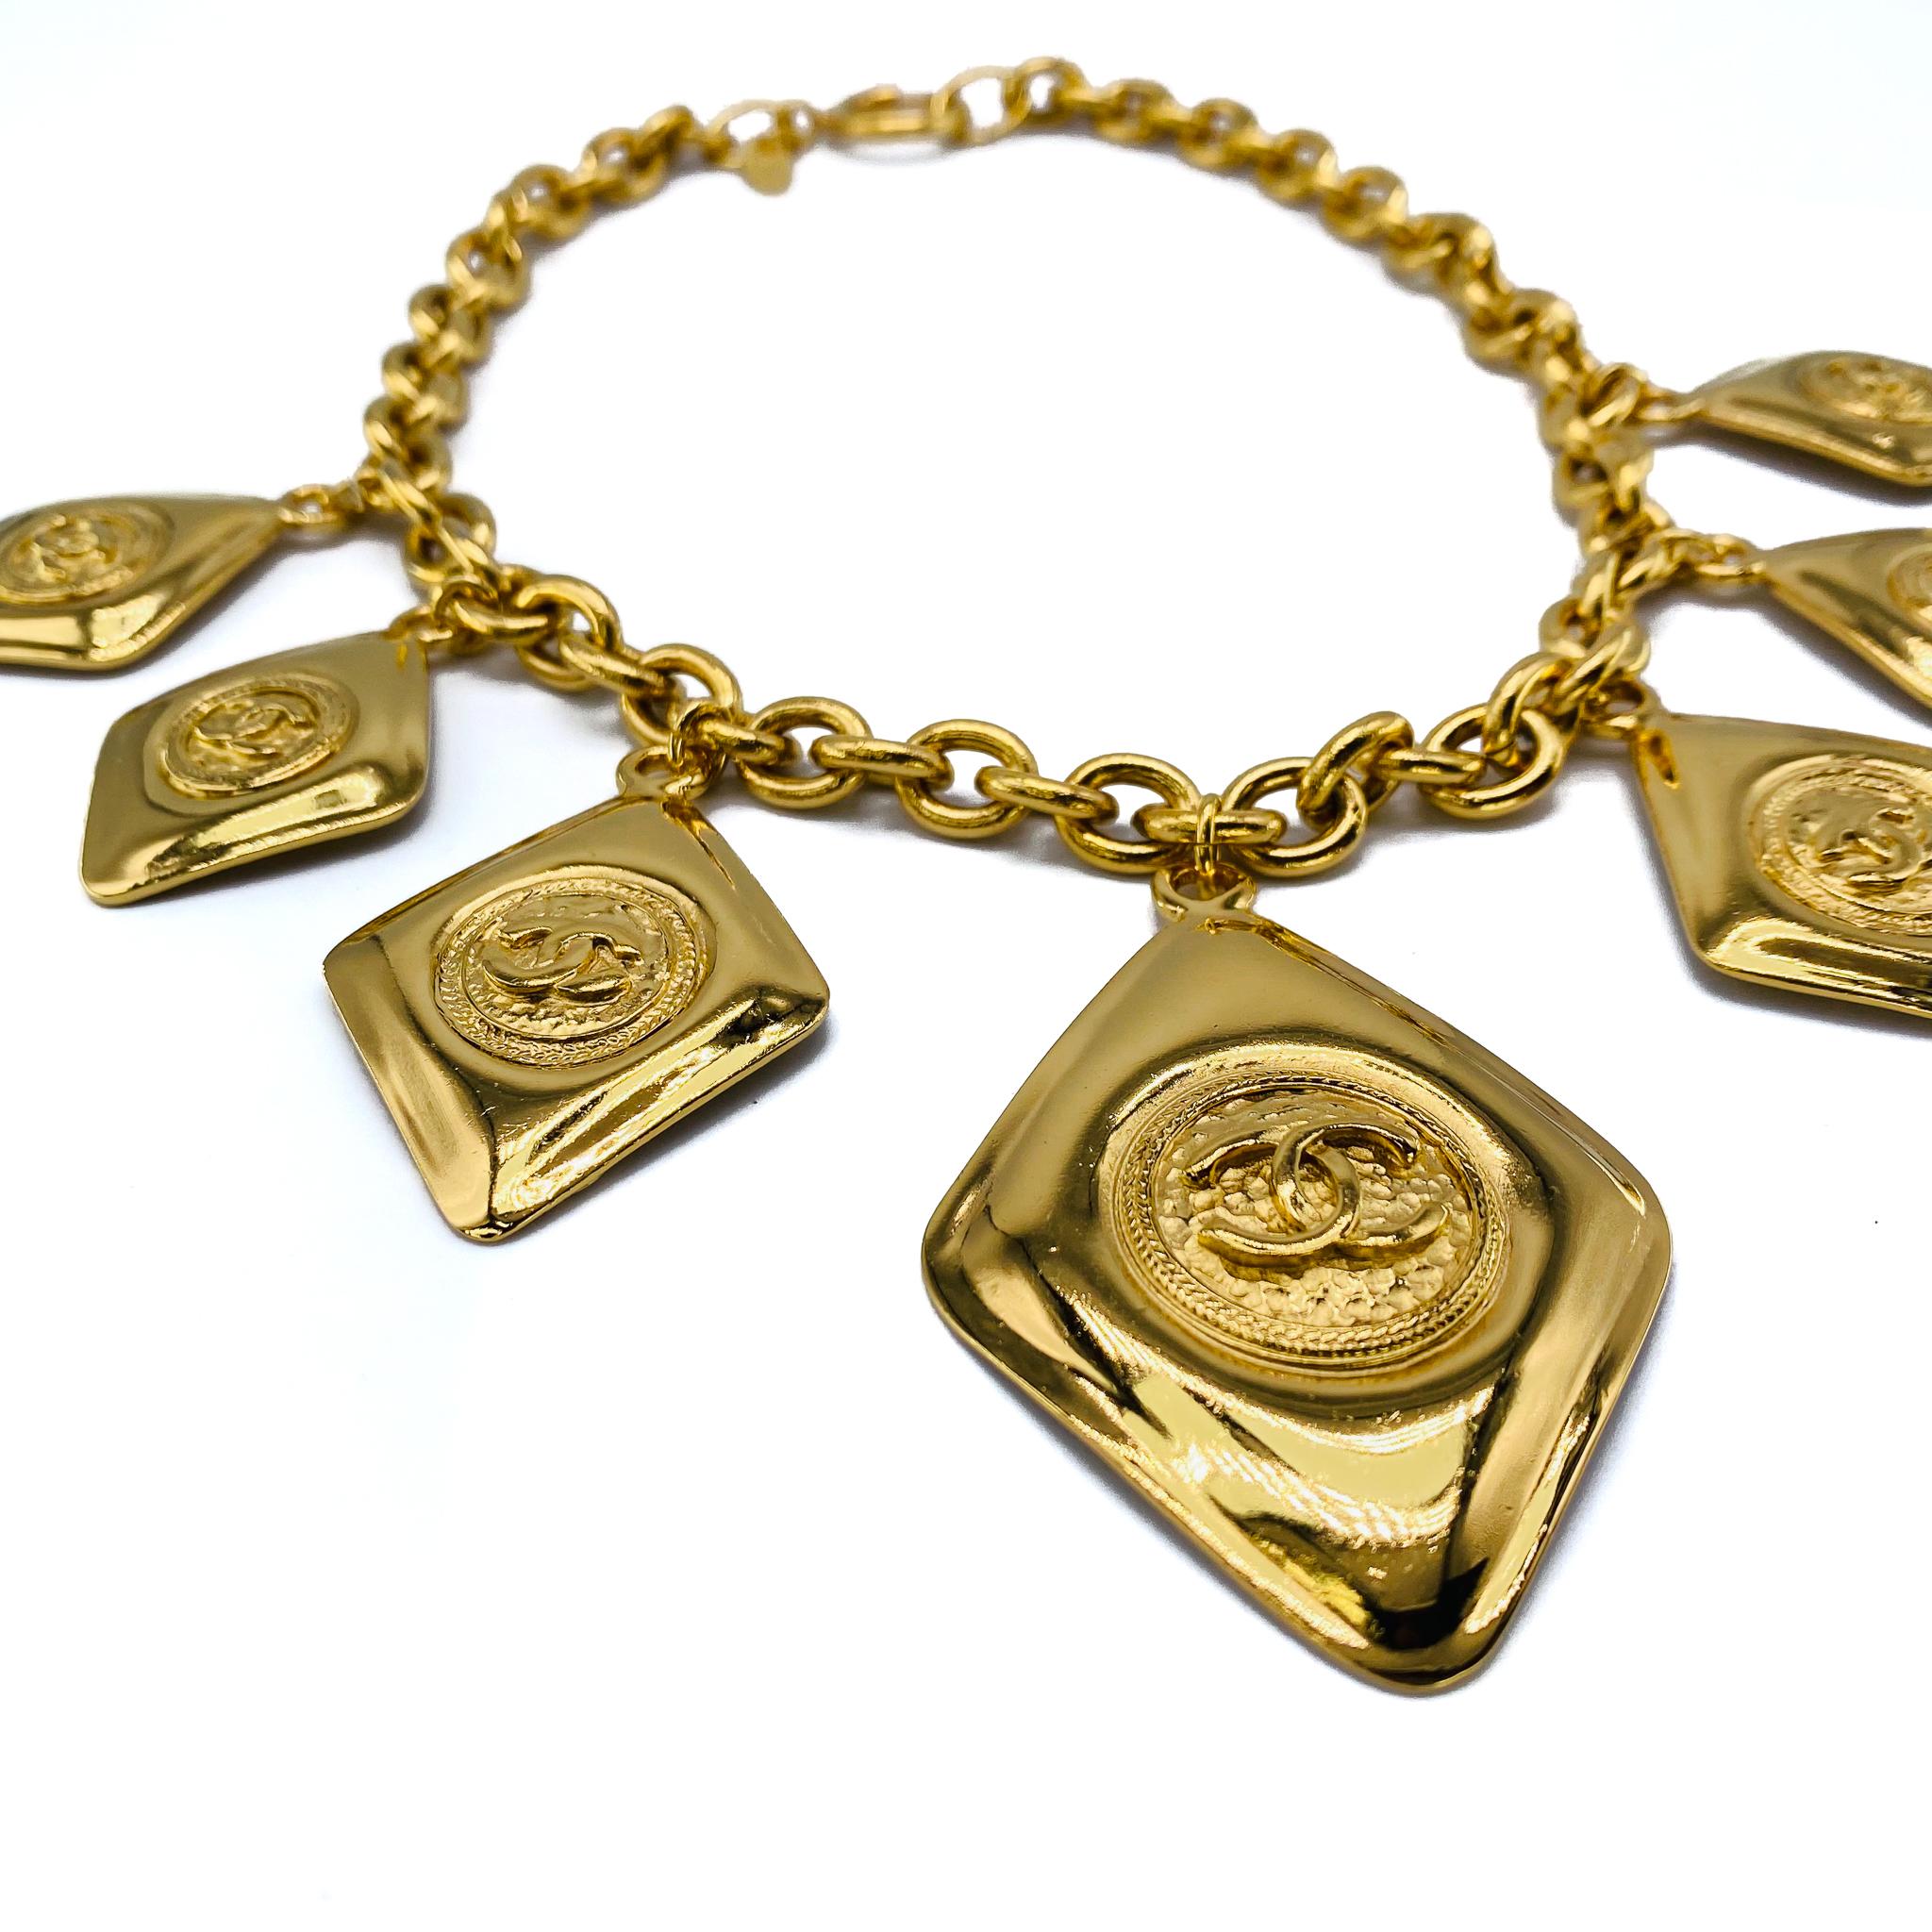 Women's Vintage Chanel 1980s Gold Plated Charm Necklace